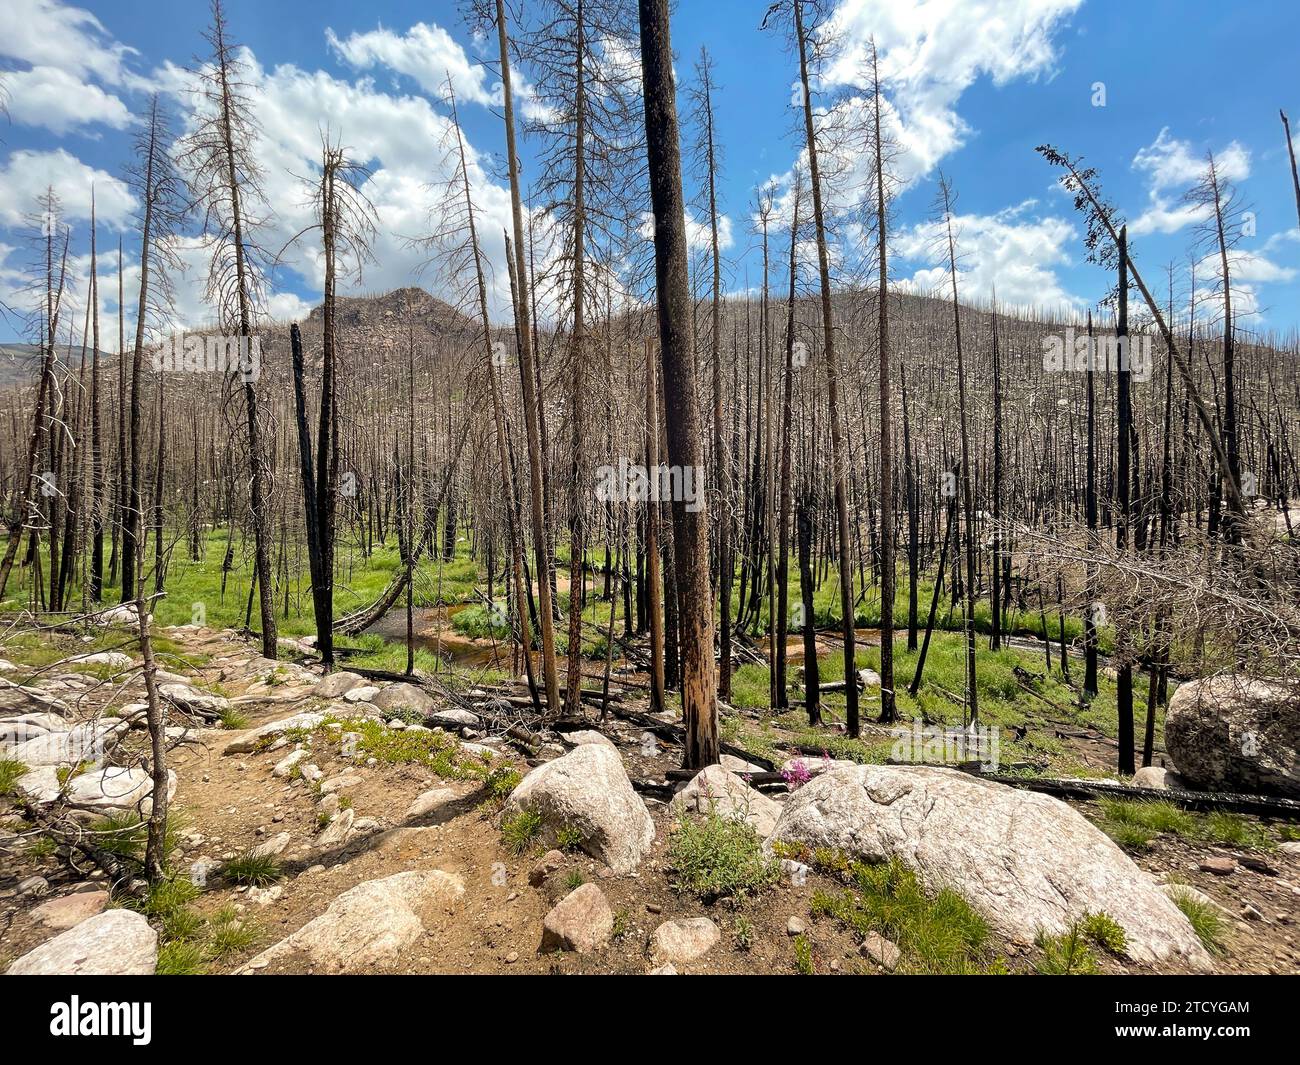 Lush new plant life carpets the forest floor among charred trees in Rocky Mountain National Park, a testament to nature's endurance. Stock Photo